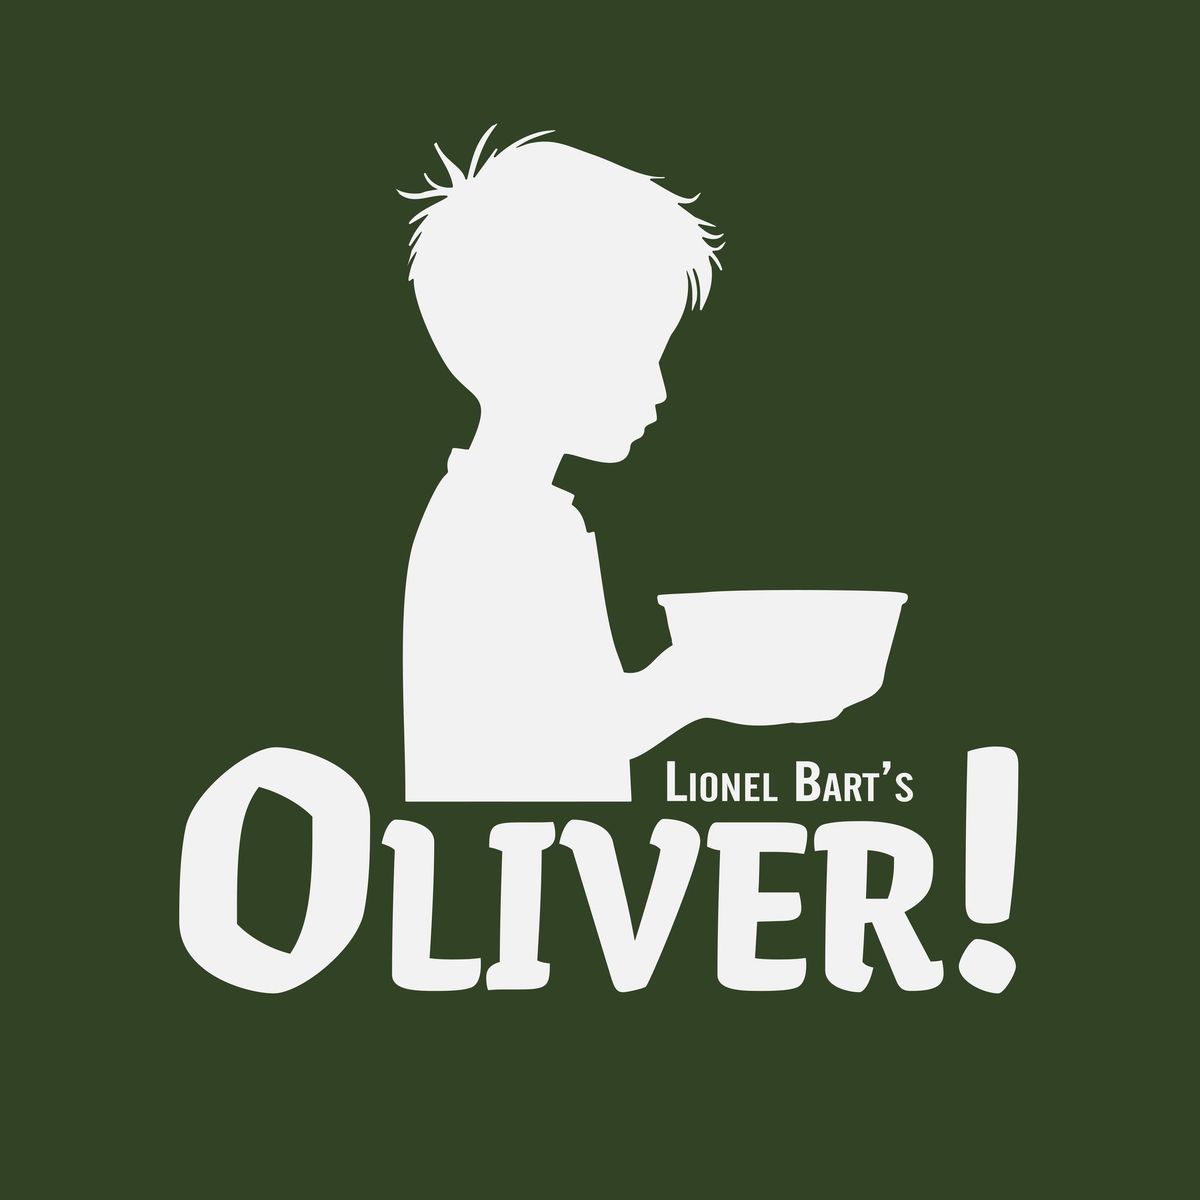 Youth Summer Theatre's Production of Oliver! 